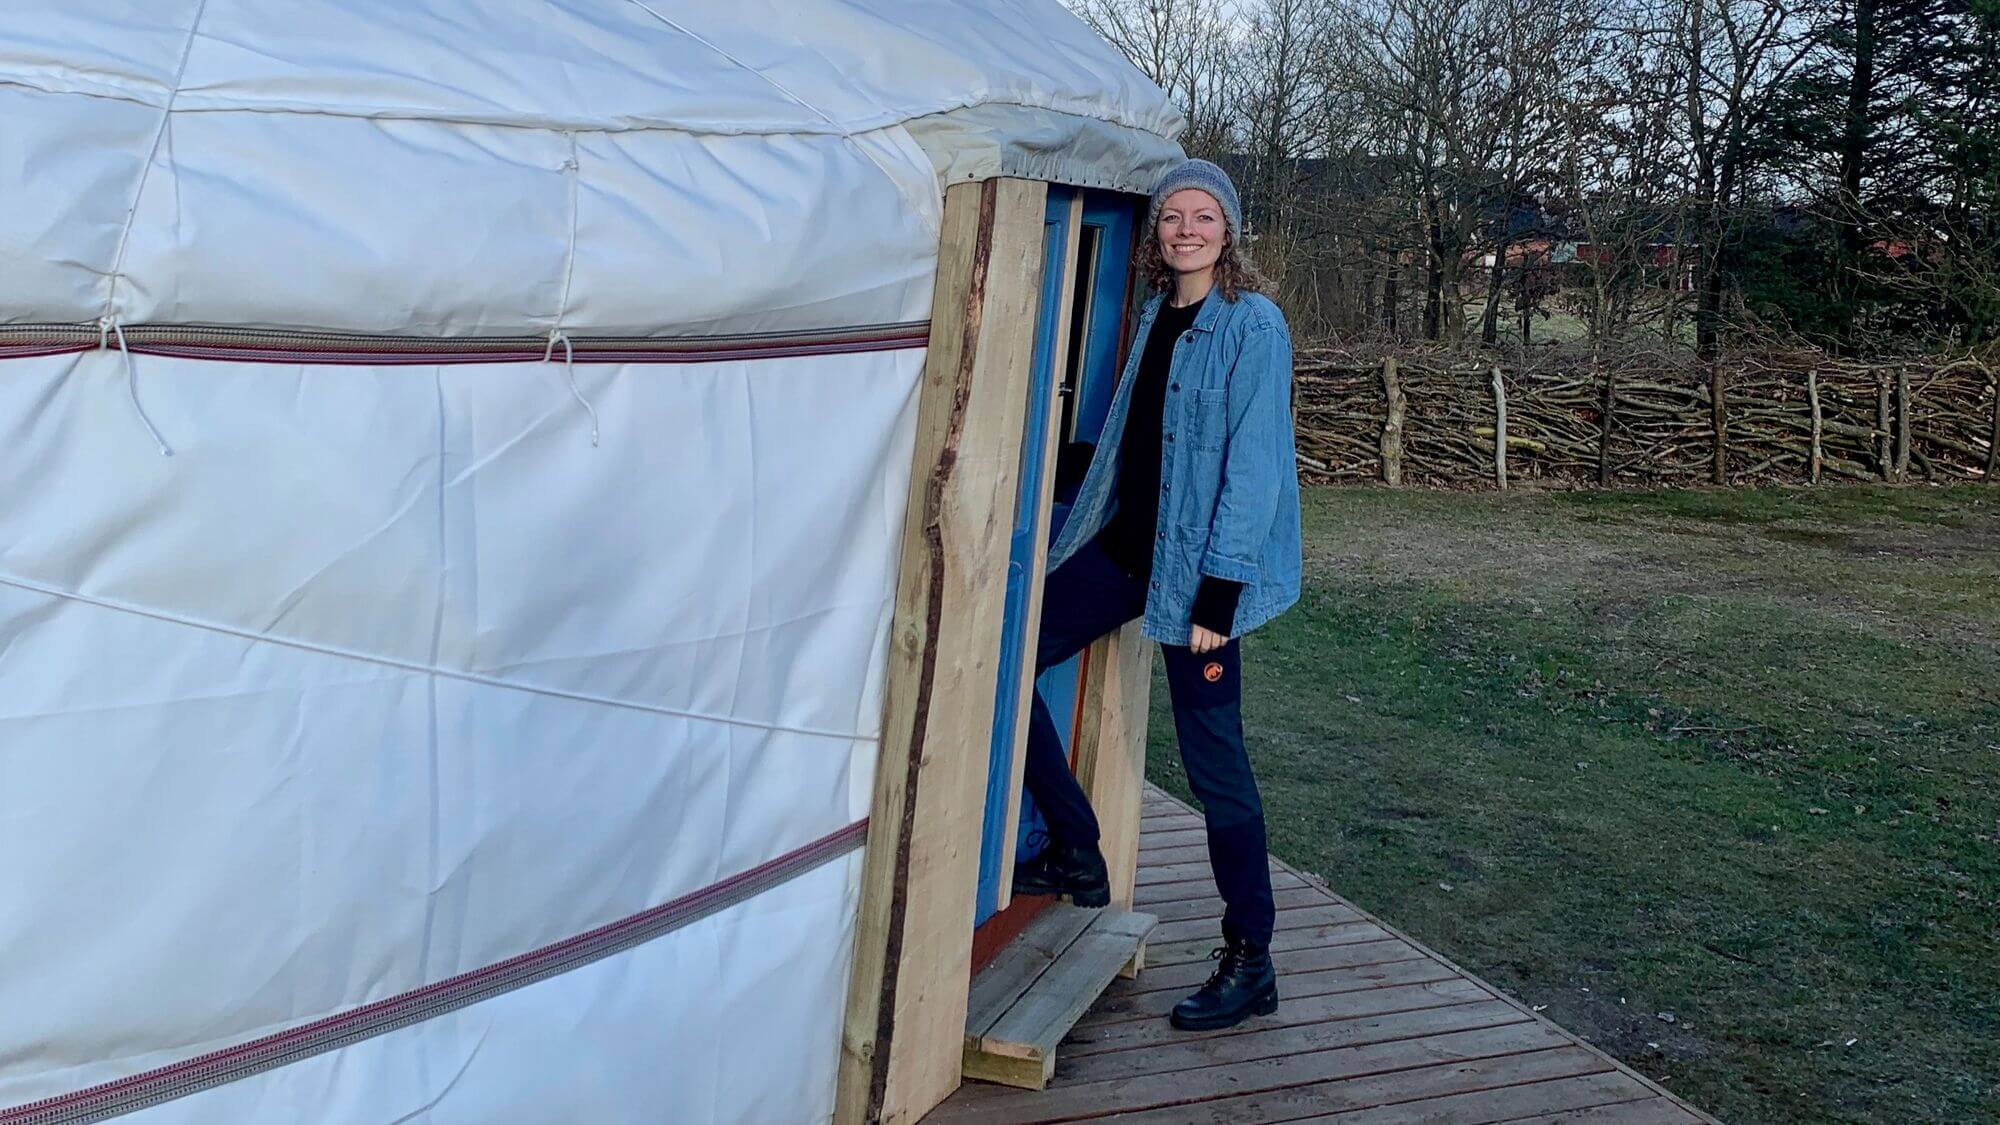 How This Denmark No-Code Founder Built and Sold Her Camping Marketplace